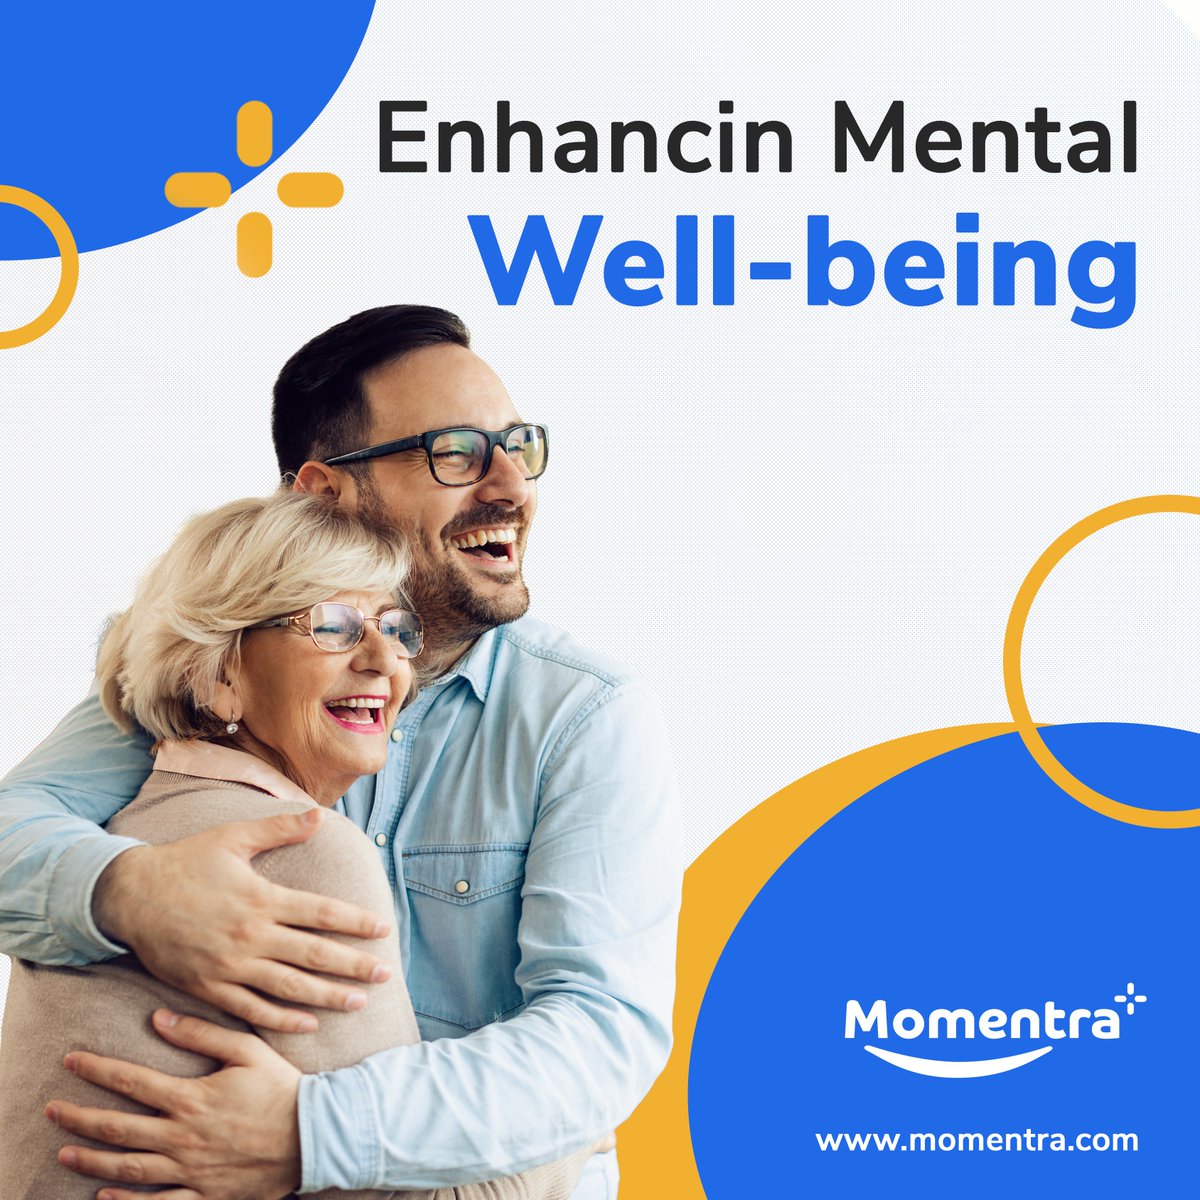 Elevate your mental well-being with Momentra – your virtual companion on the journey to a happier, healthier you. Discover the power of connection and self-care for older adults today! #VirtualCompanions #EnhancingWellbeing #MedicareAdvantage #Momentra